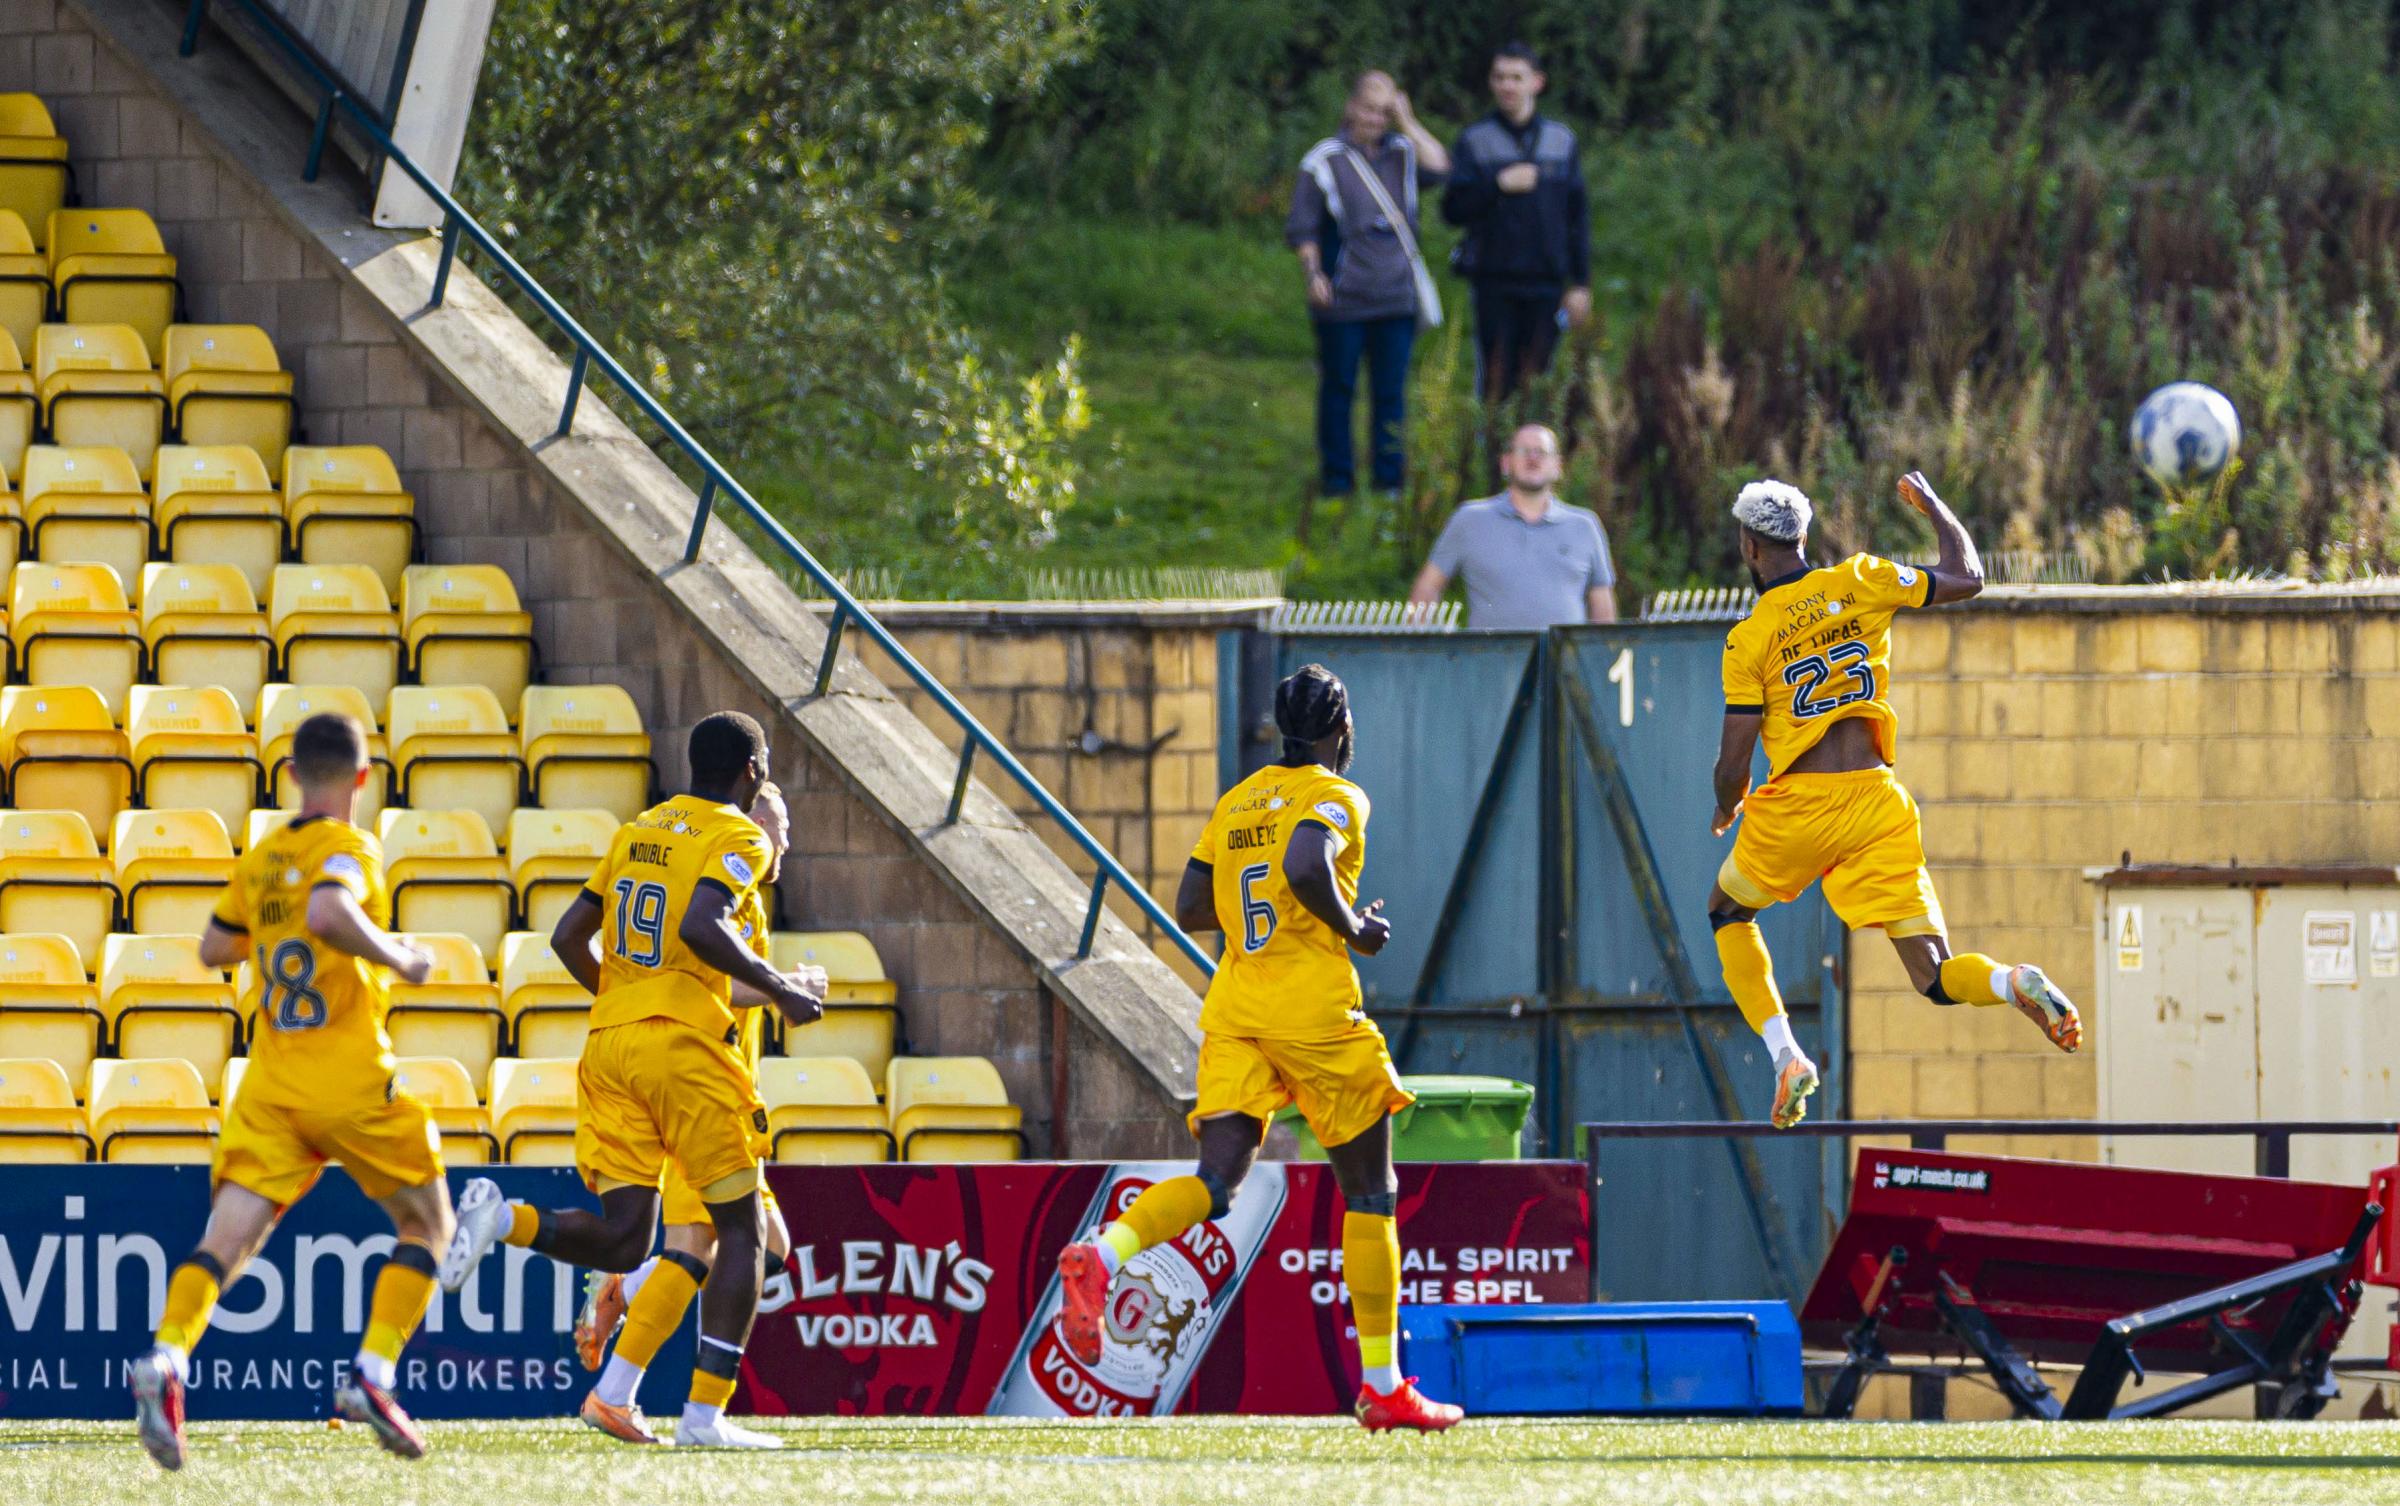 Livingston 1 St Mirren 1: Instant reaction to the burning issues